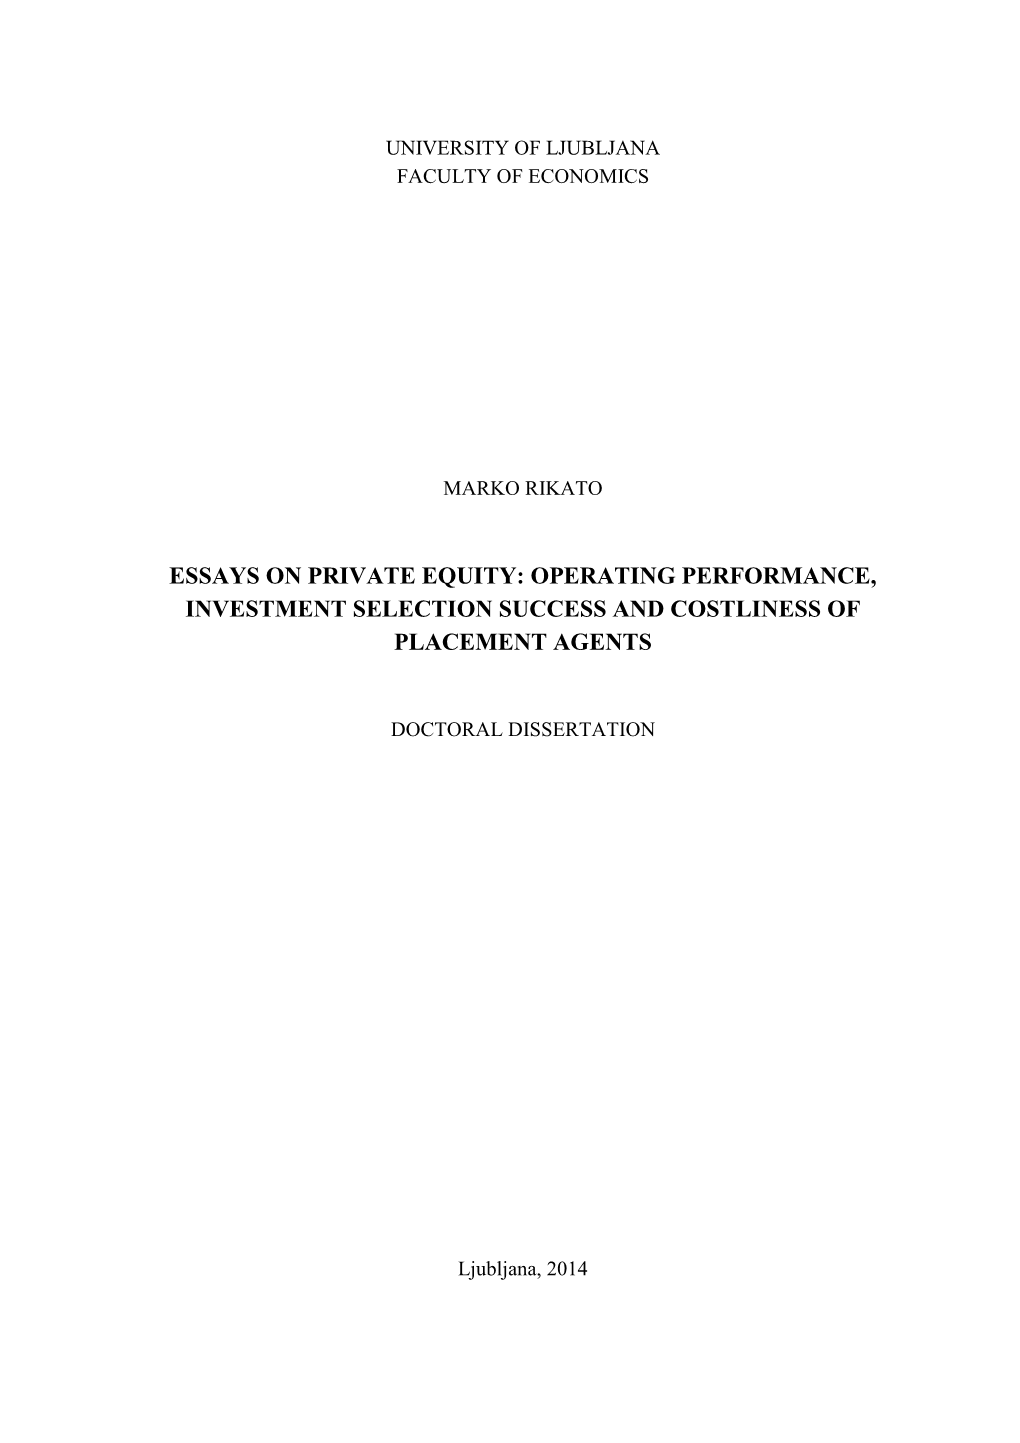 Essays on Private Equity: Operating Performance, Investment Selection Success and Costliness of Placement Agents